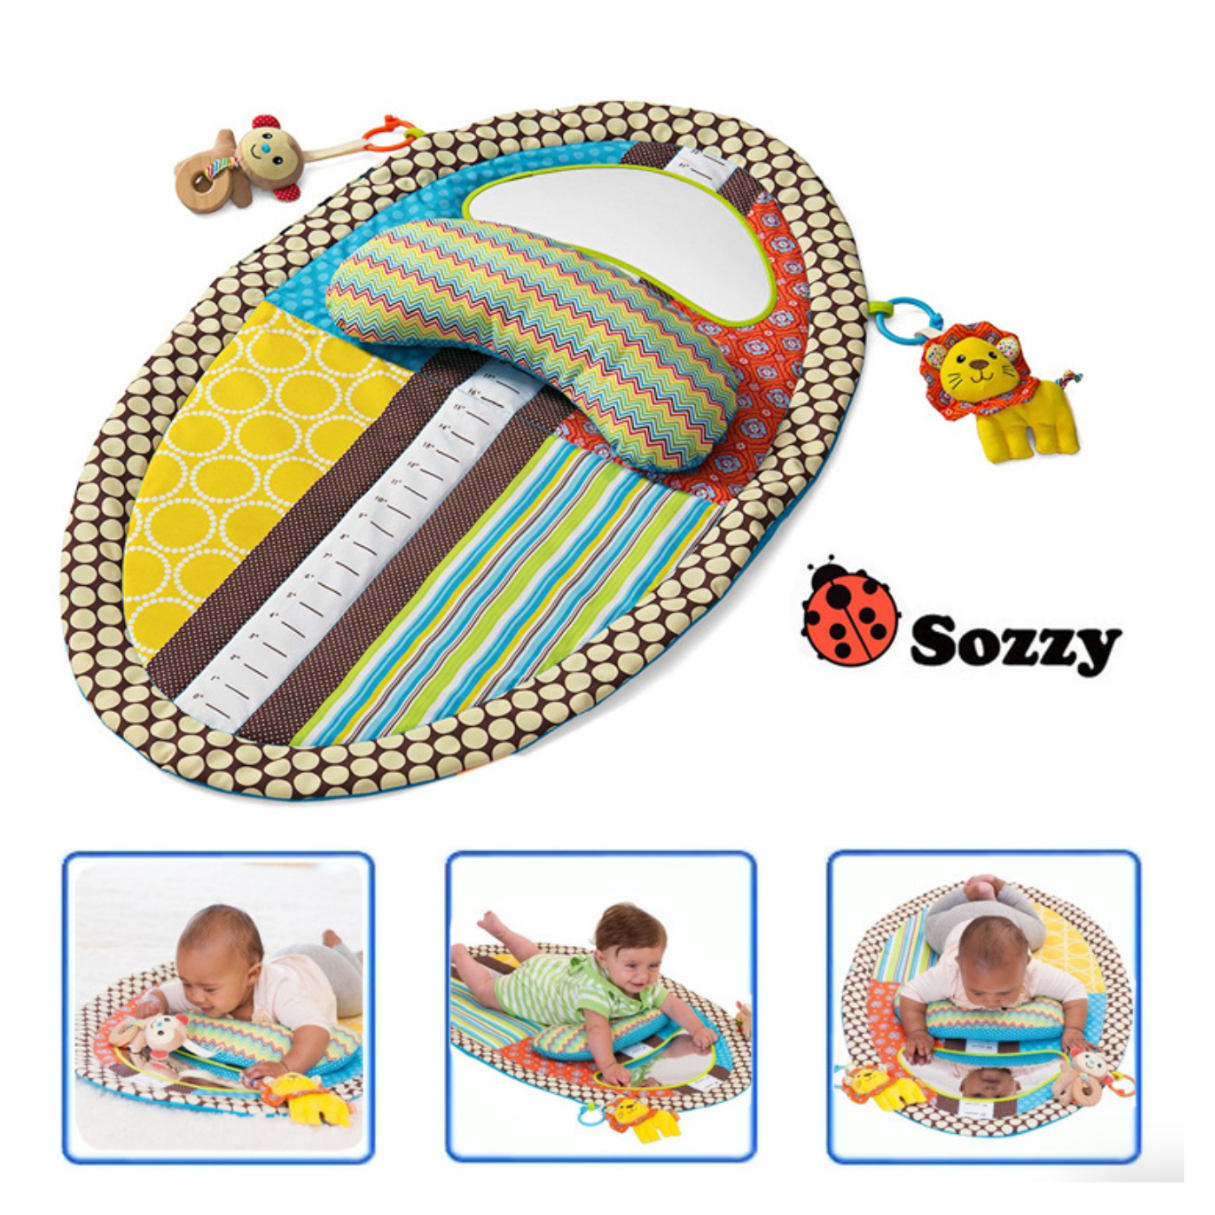 Sozzy Baby Tummy Time Activity Play Mat & Gym